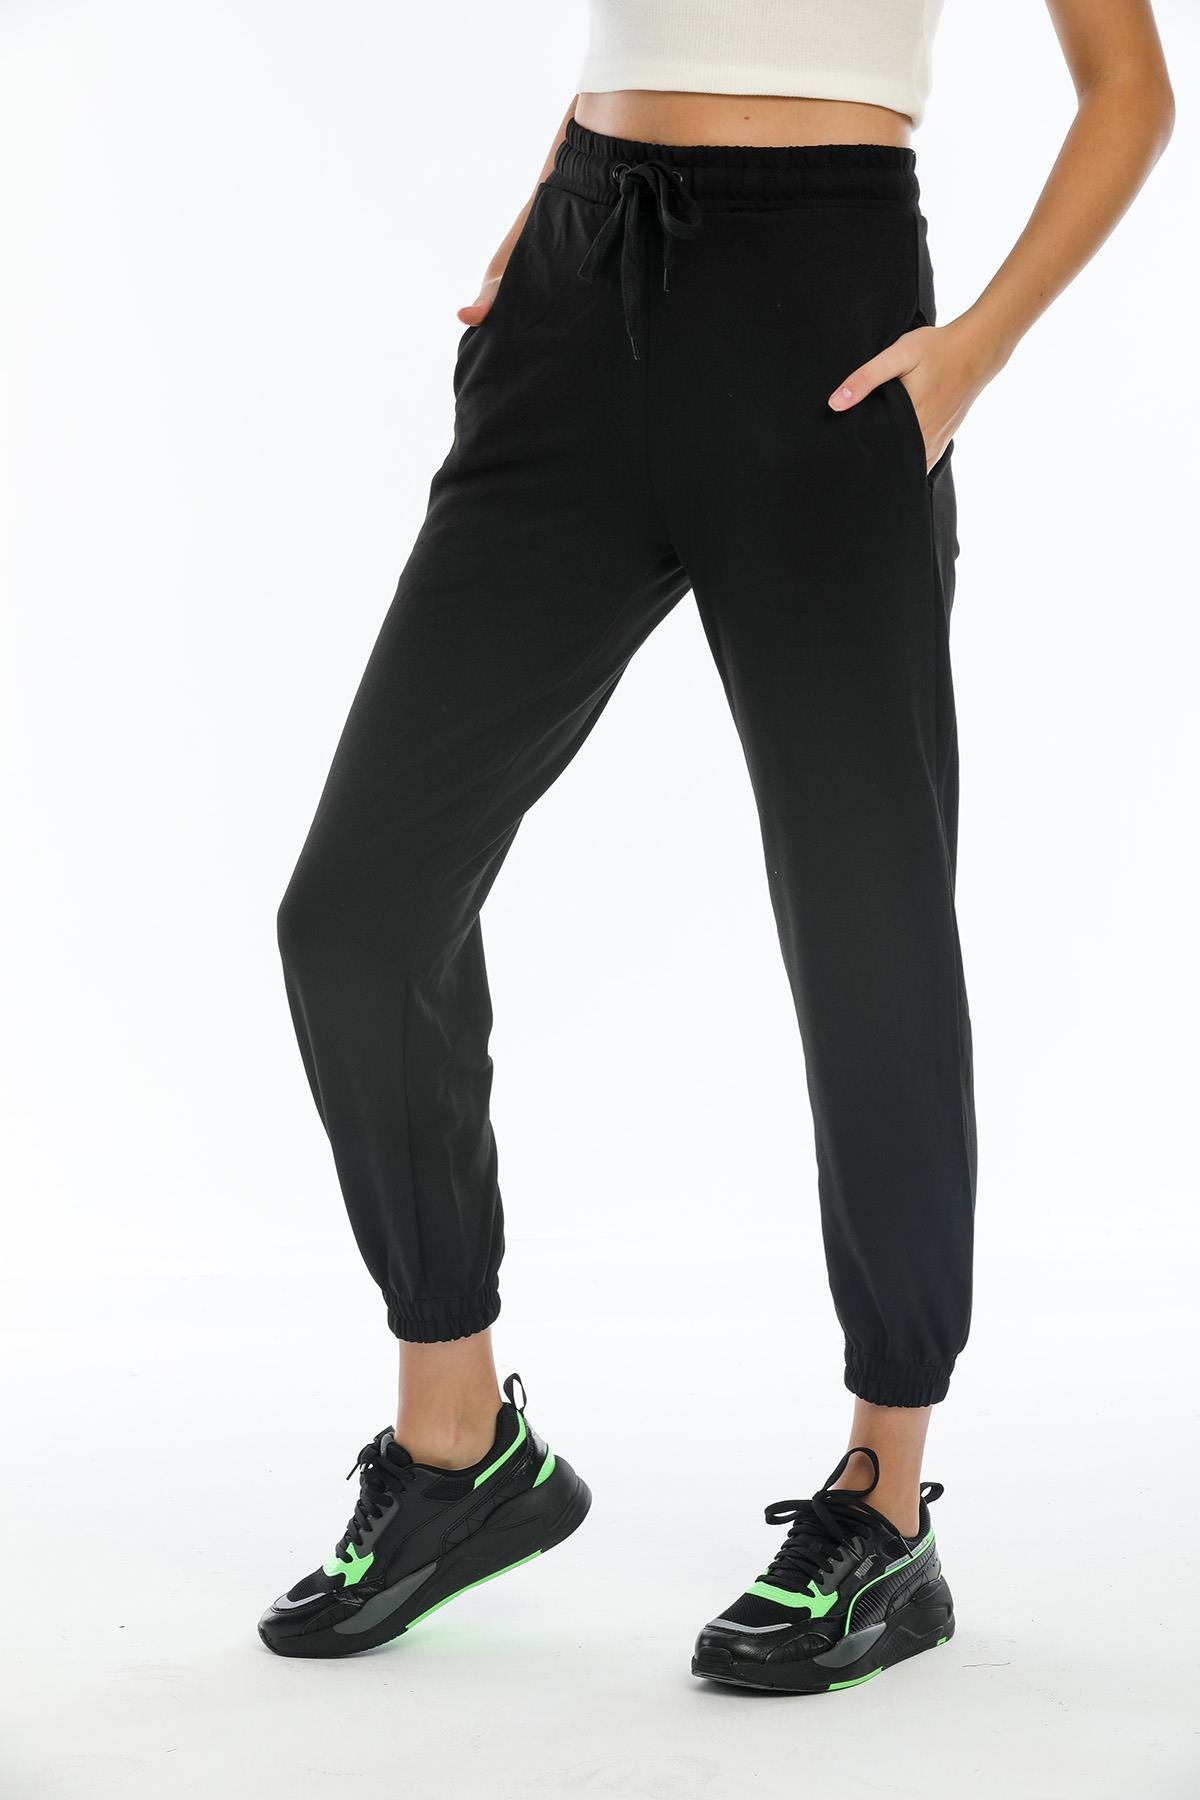 Waist, trotter, jogger steel knitted trousers with pockets female leggings